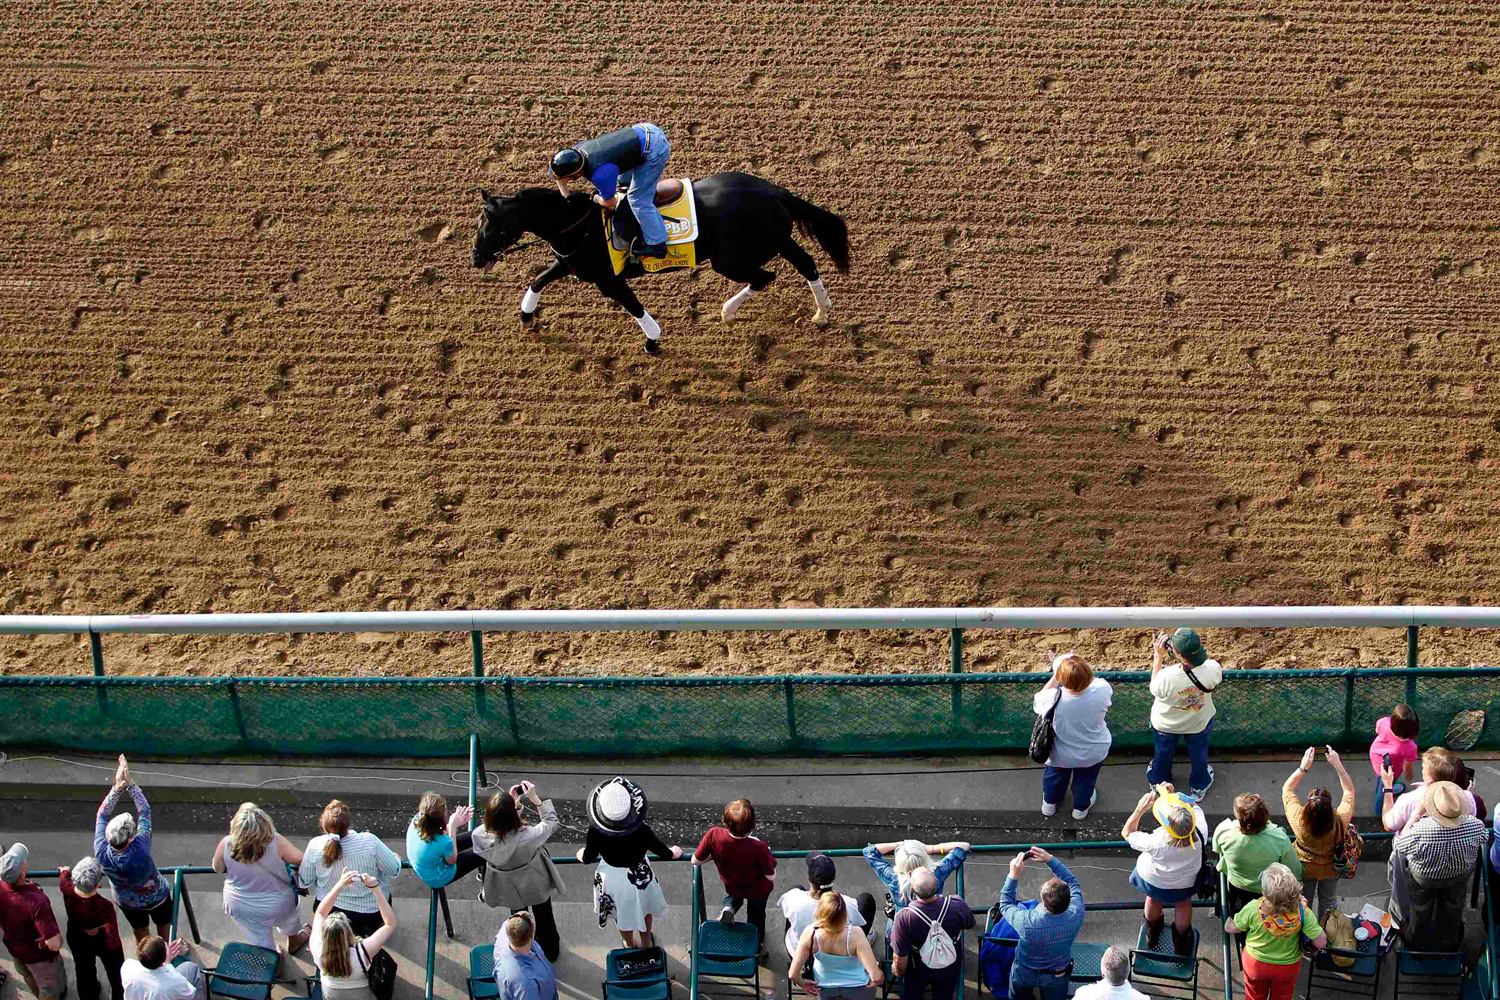 May 3, 2012. Jockey Borel aboard Take Charge Indy walks down the front stretch during morning workouts at Churchill Downs in Louisville, Ky.